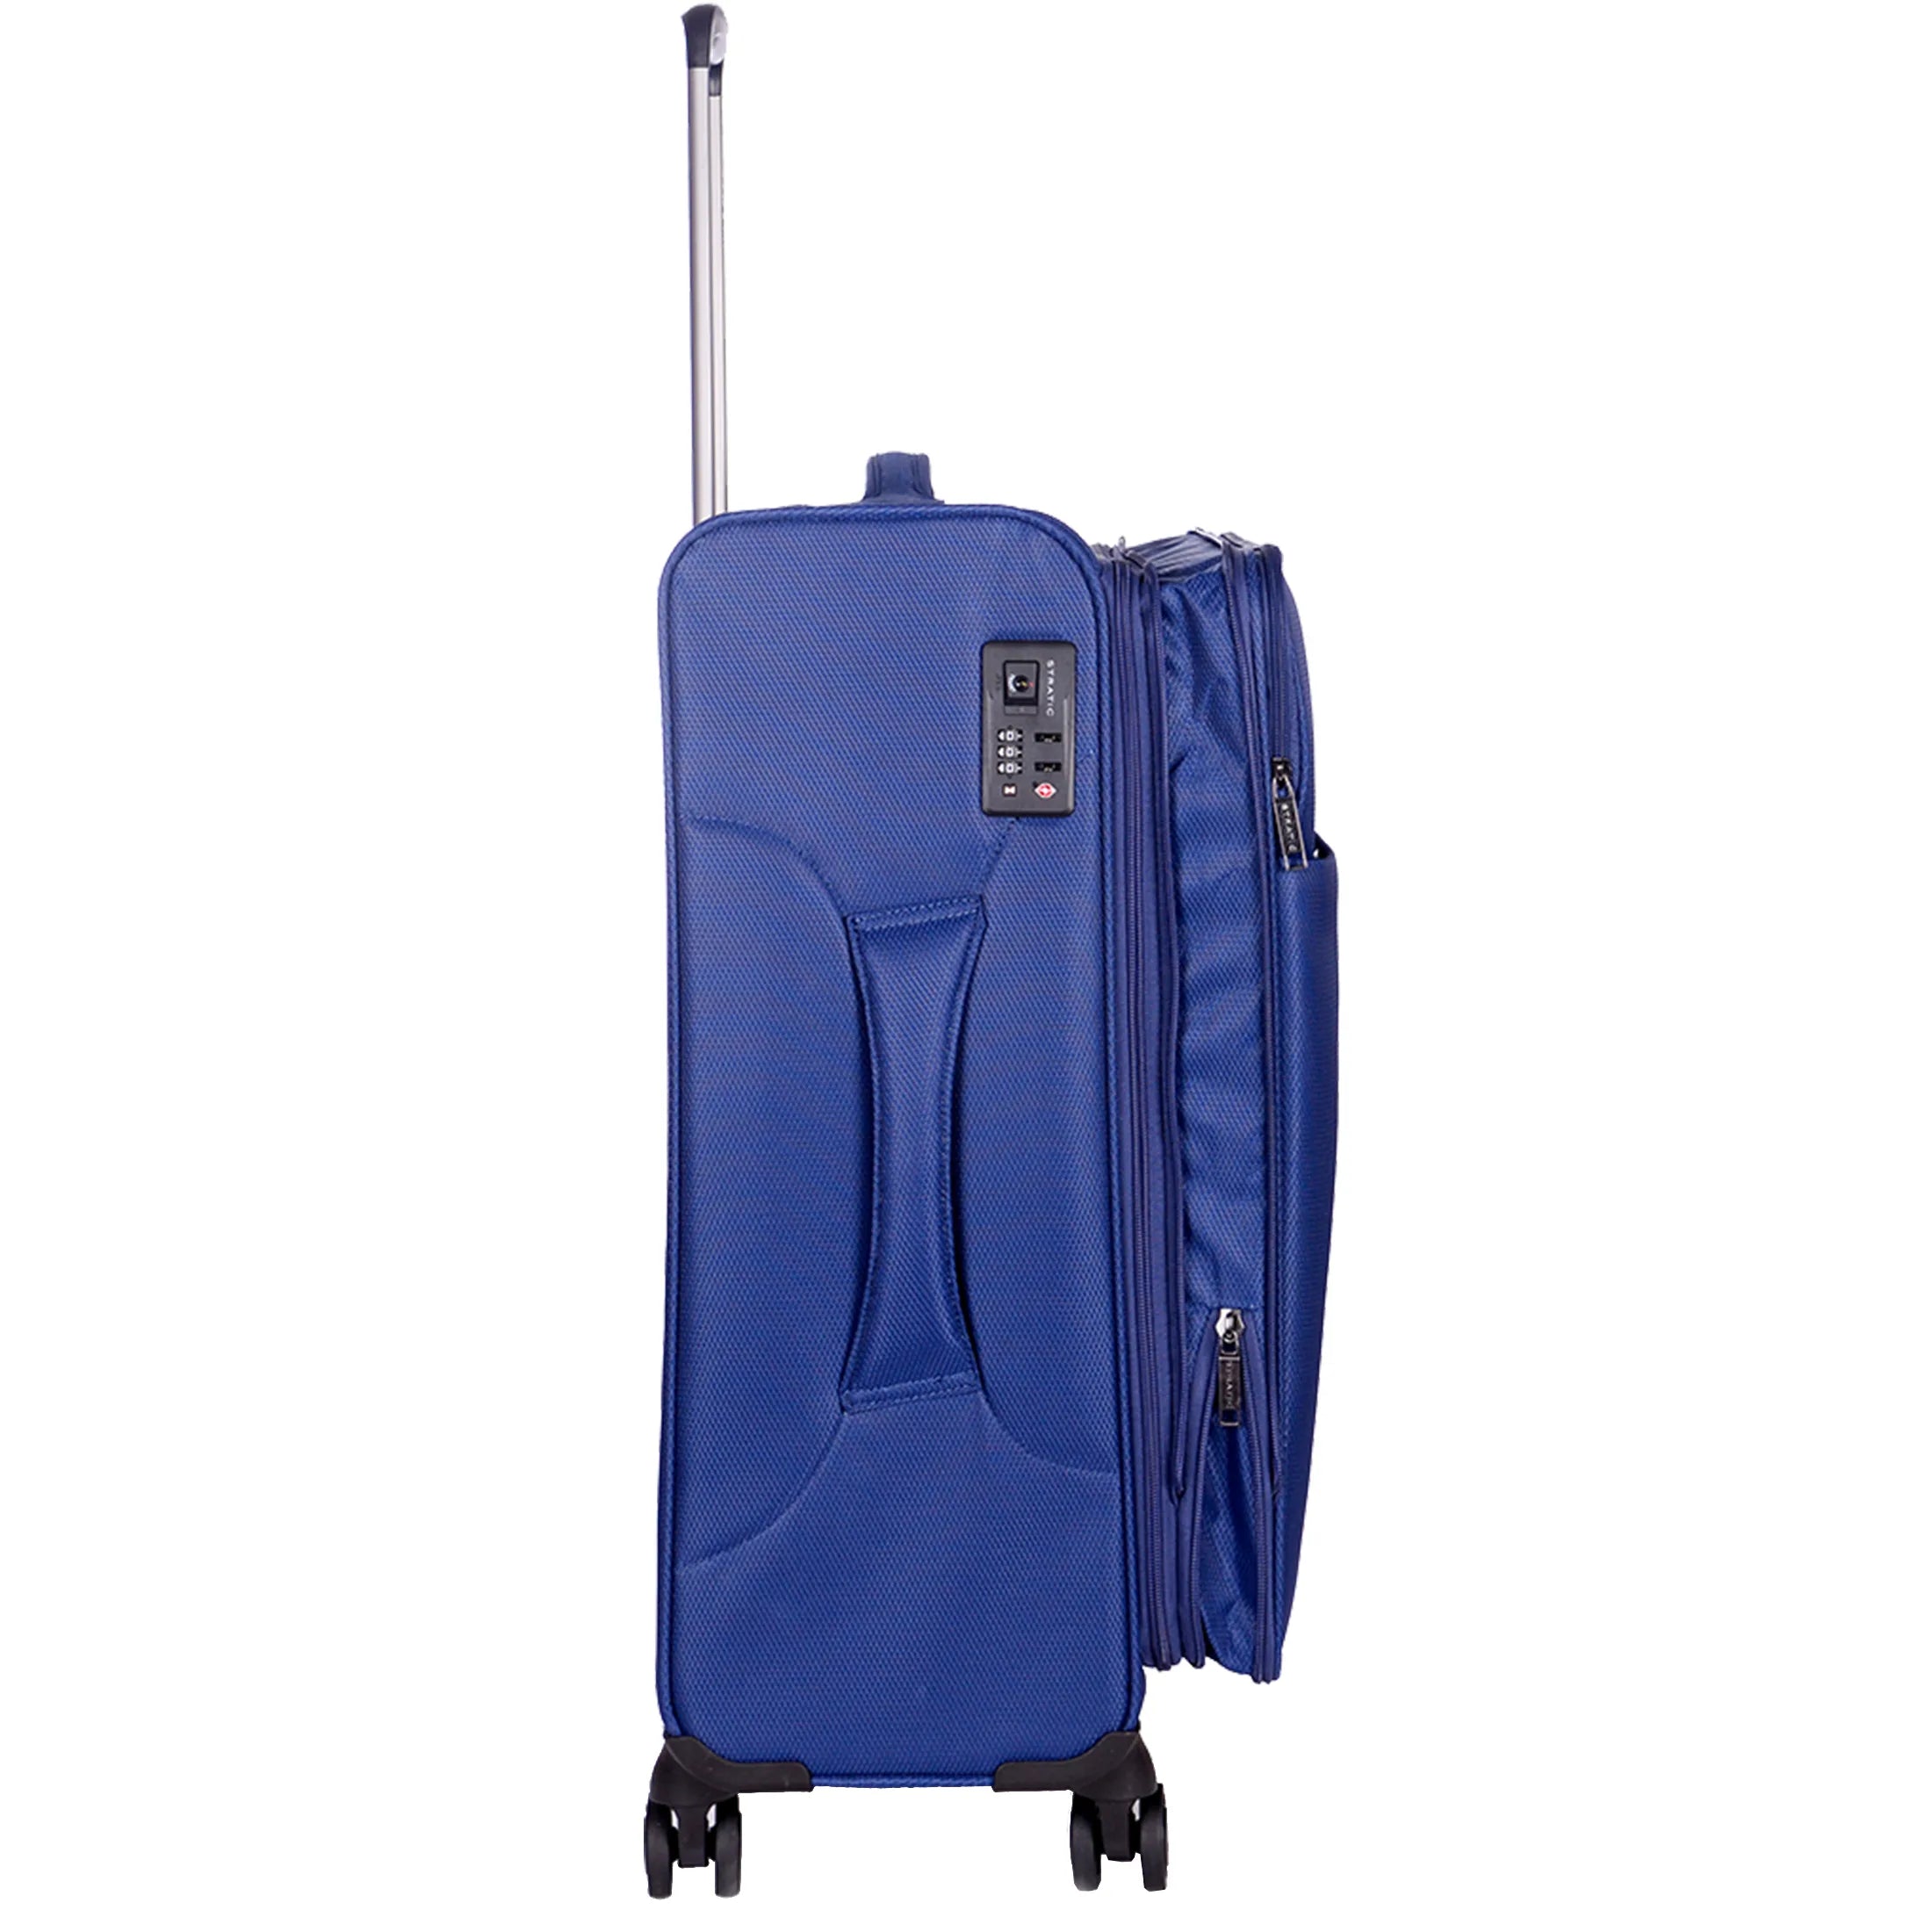 Stratic Light + trolley 4 roues 68 cm - Rouge